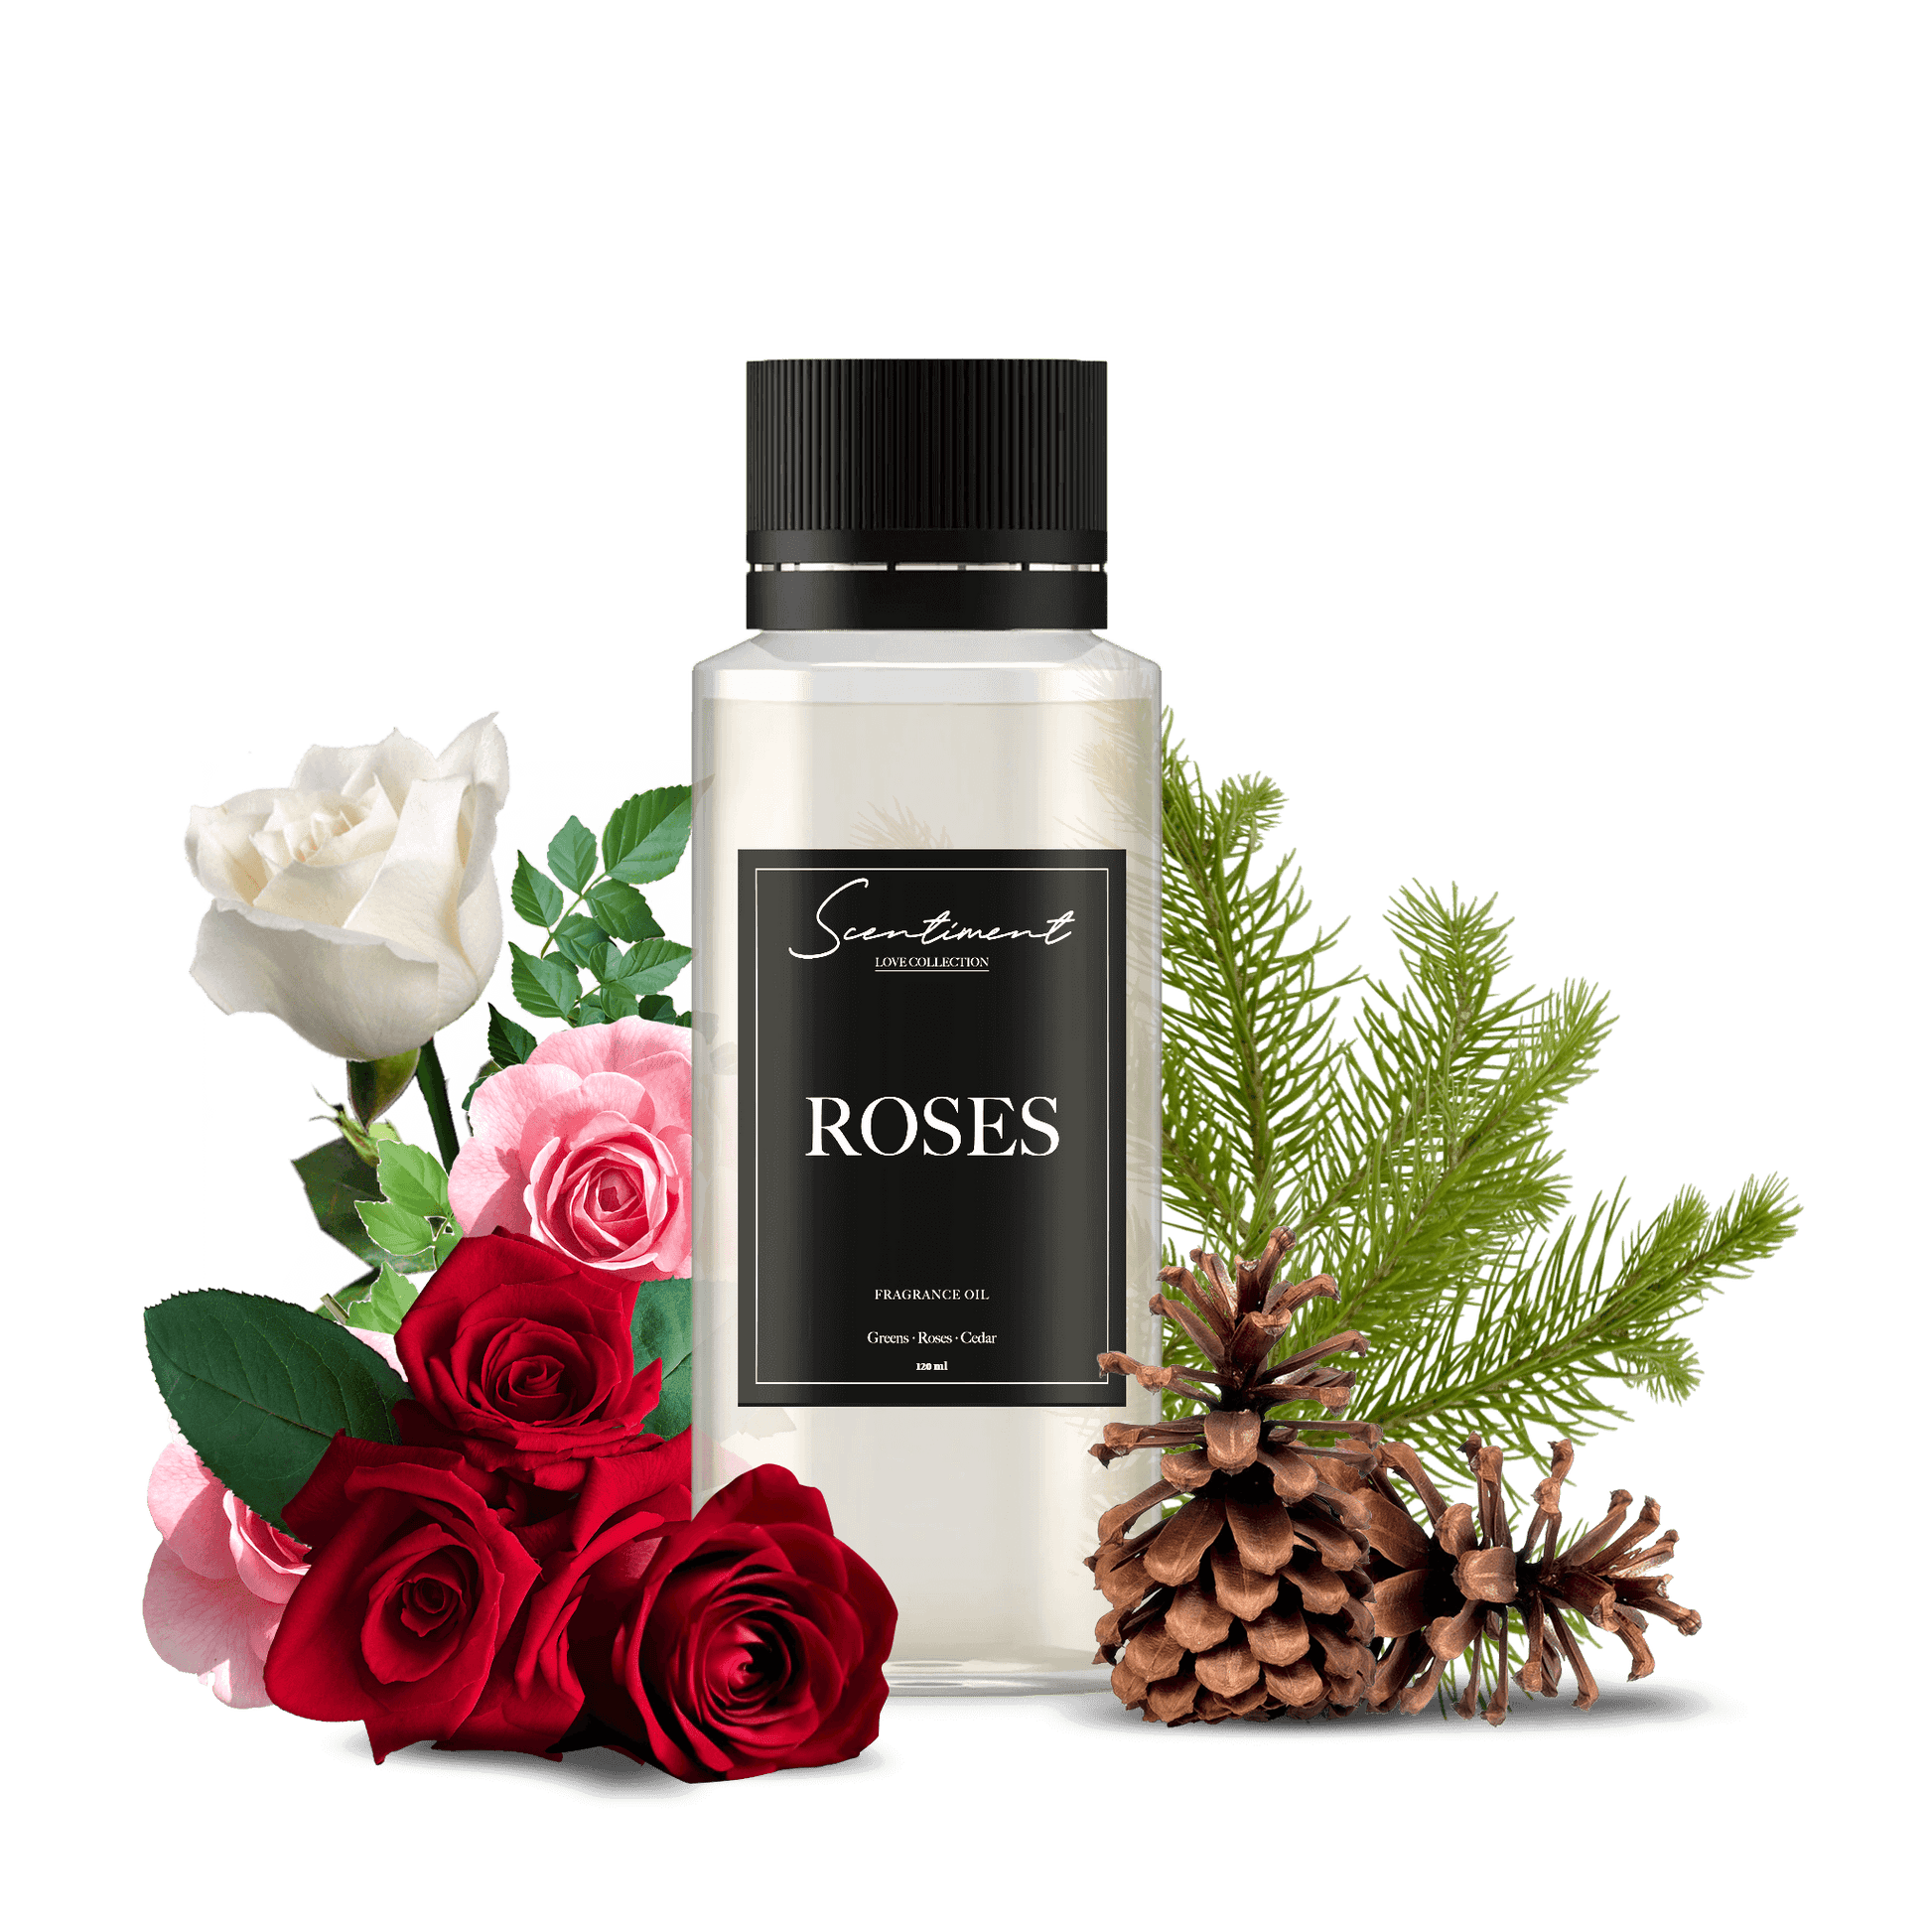 Roses Oil Fragrance, with notes of Greens, Roses, and Cedar.